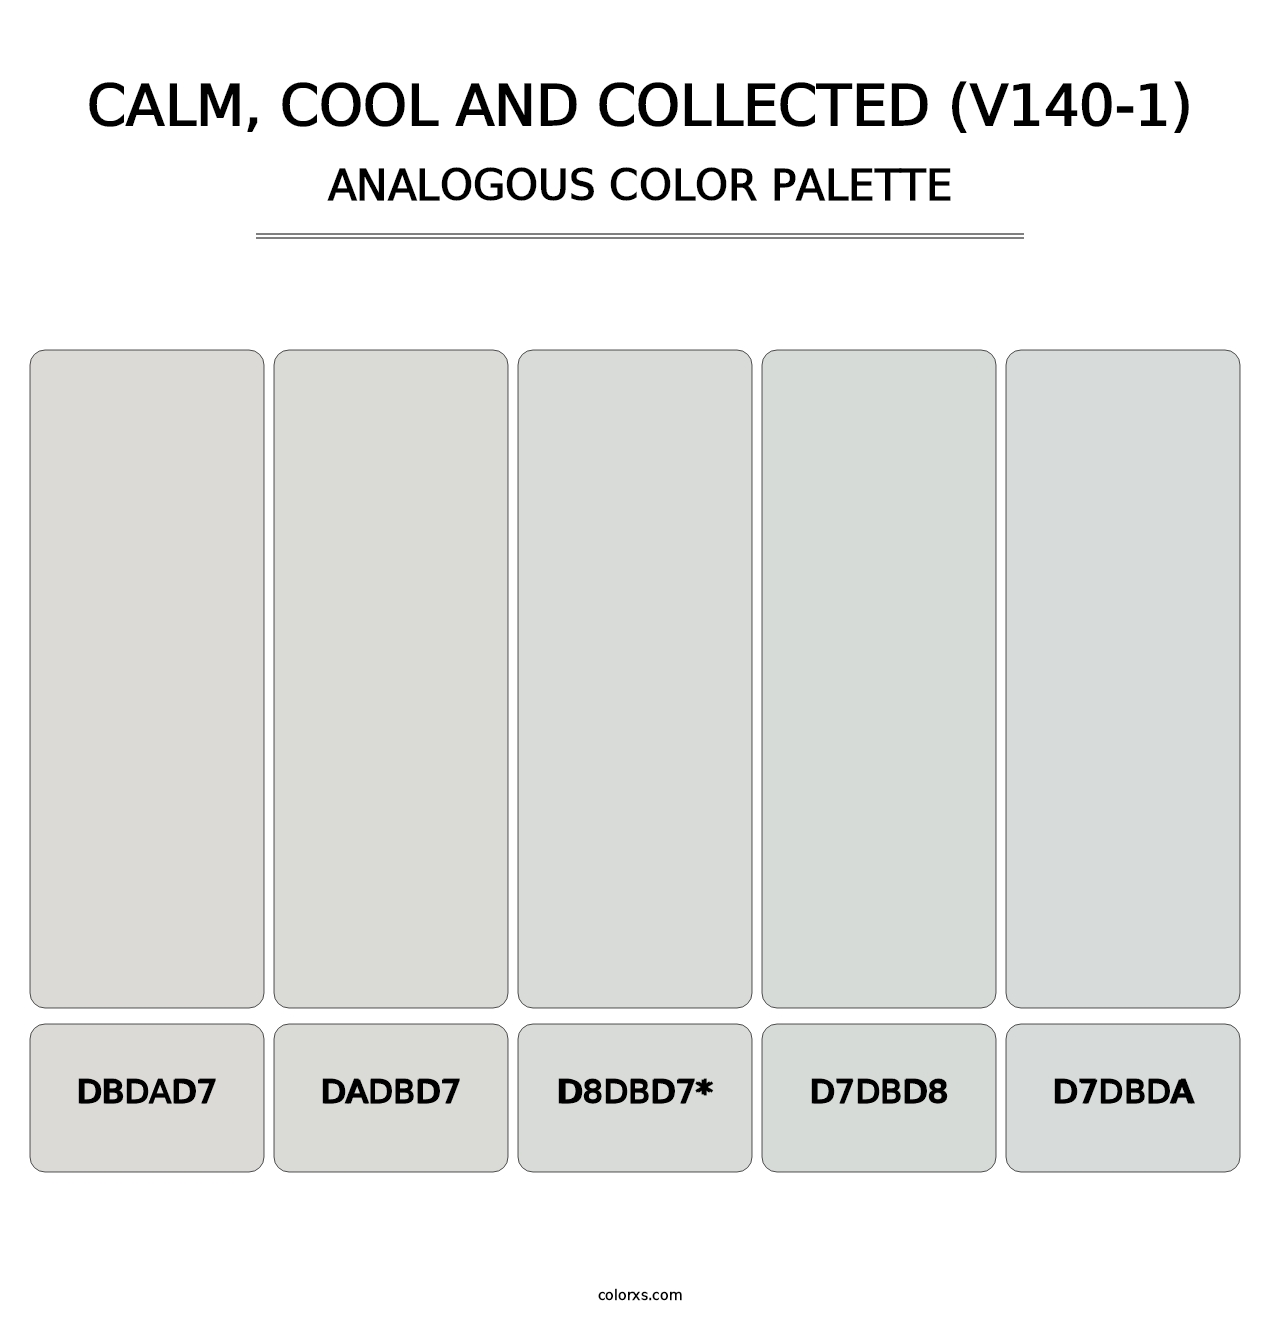 Calm, Cool and Collected (V140-1) - Analogous Color Palette